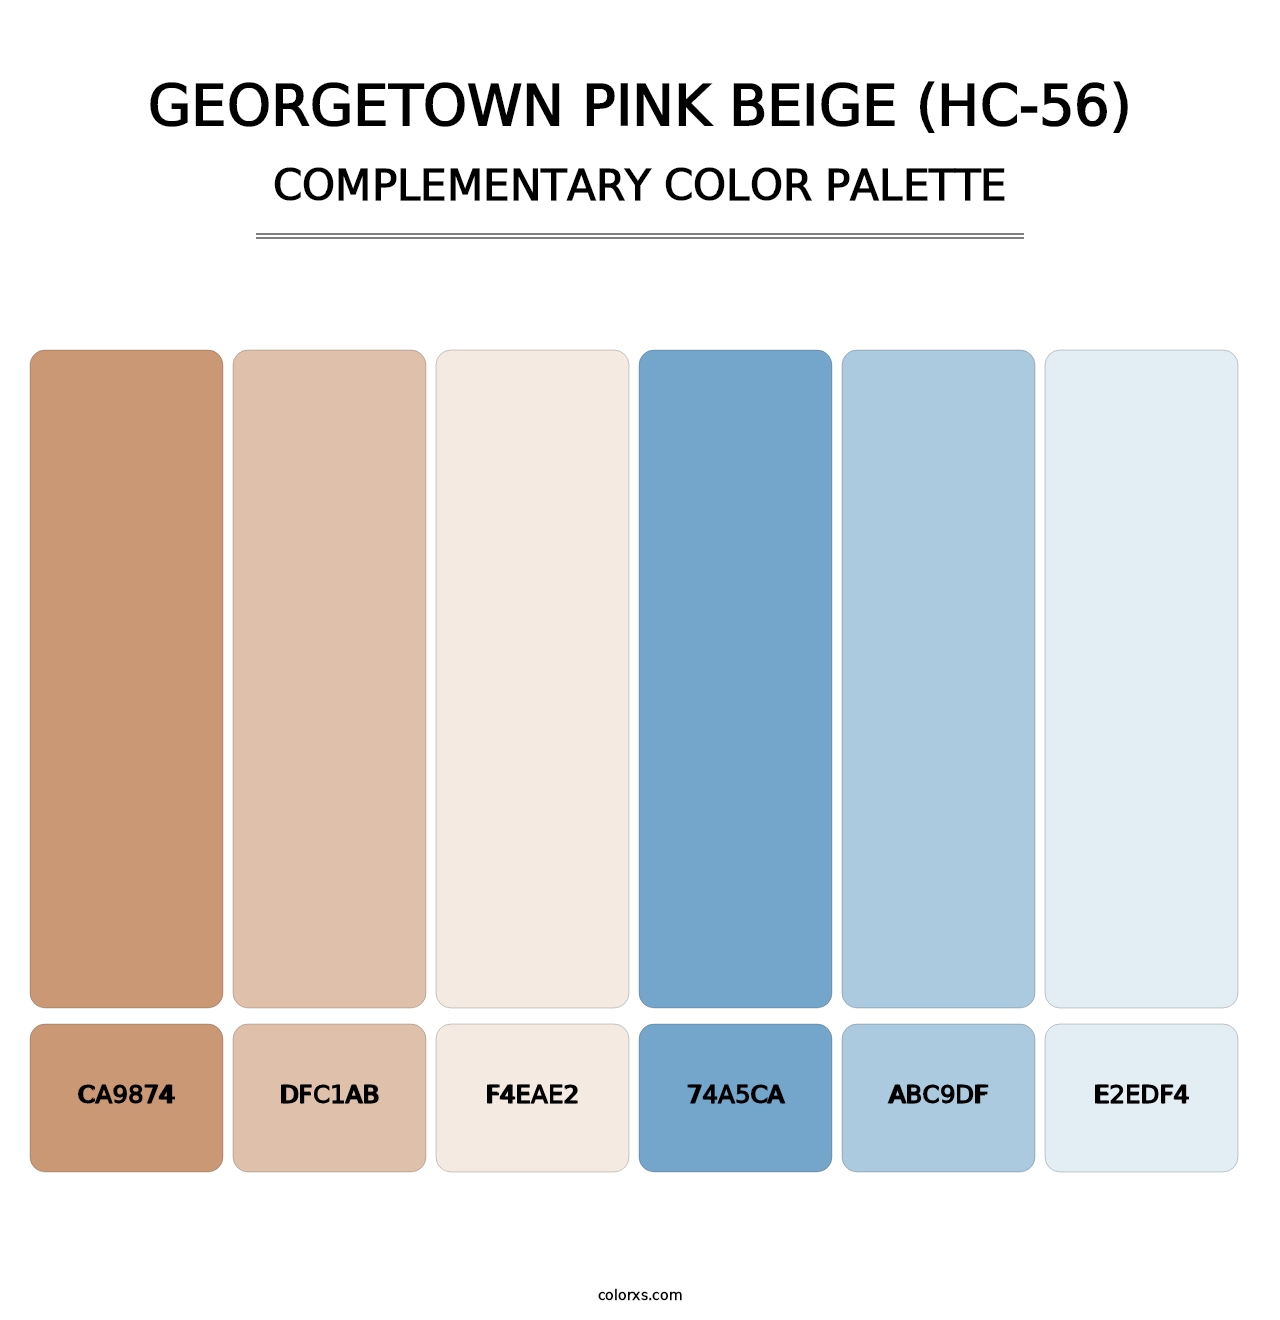 Georgetown Pink Beige (HC-56) - Complementary Color Palette